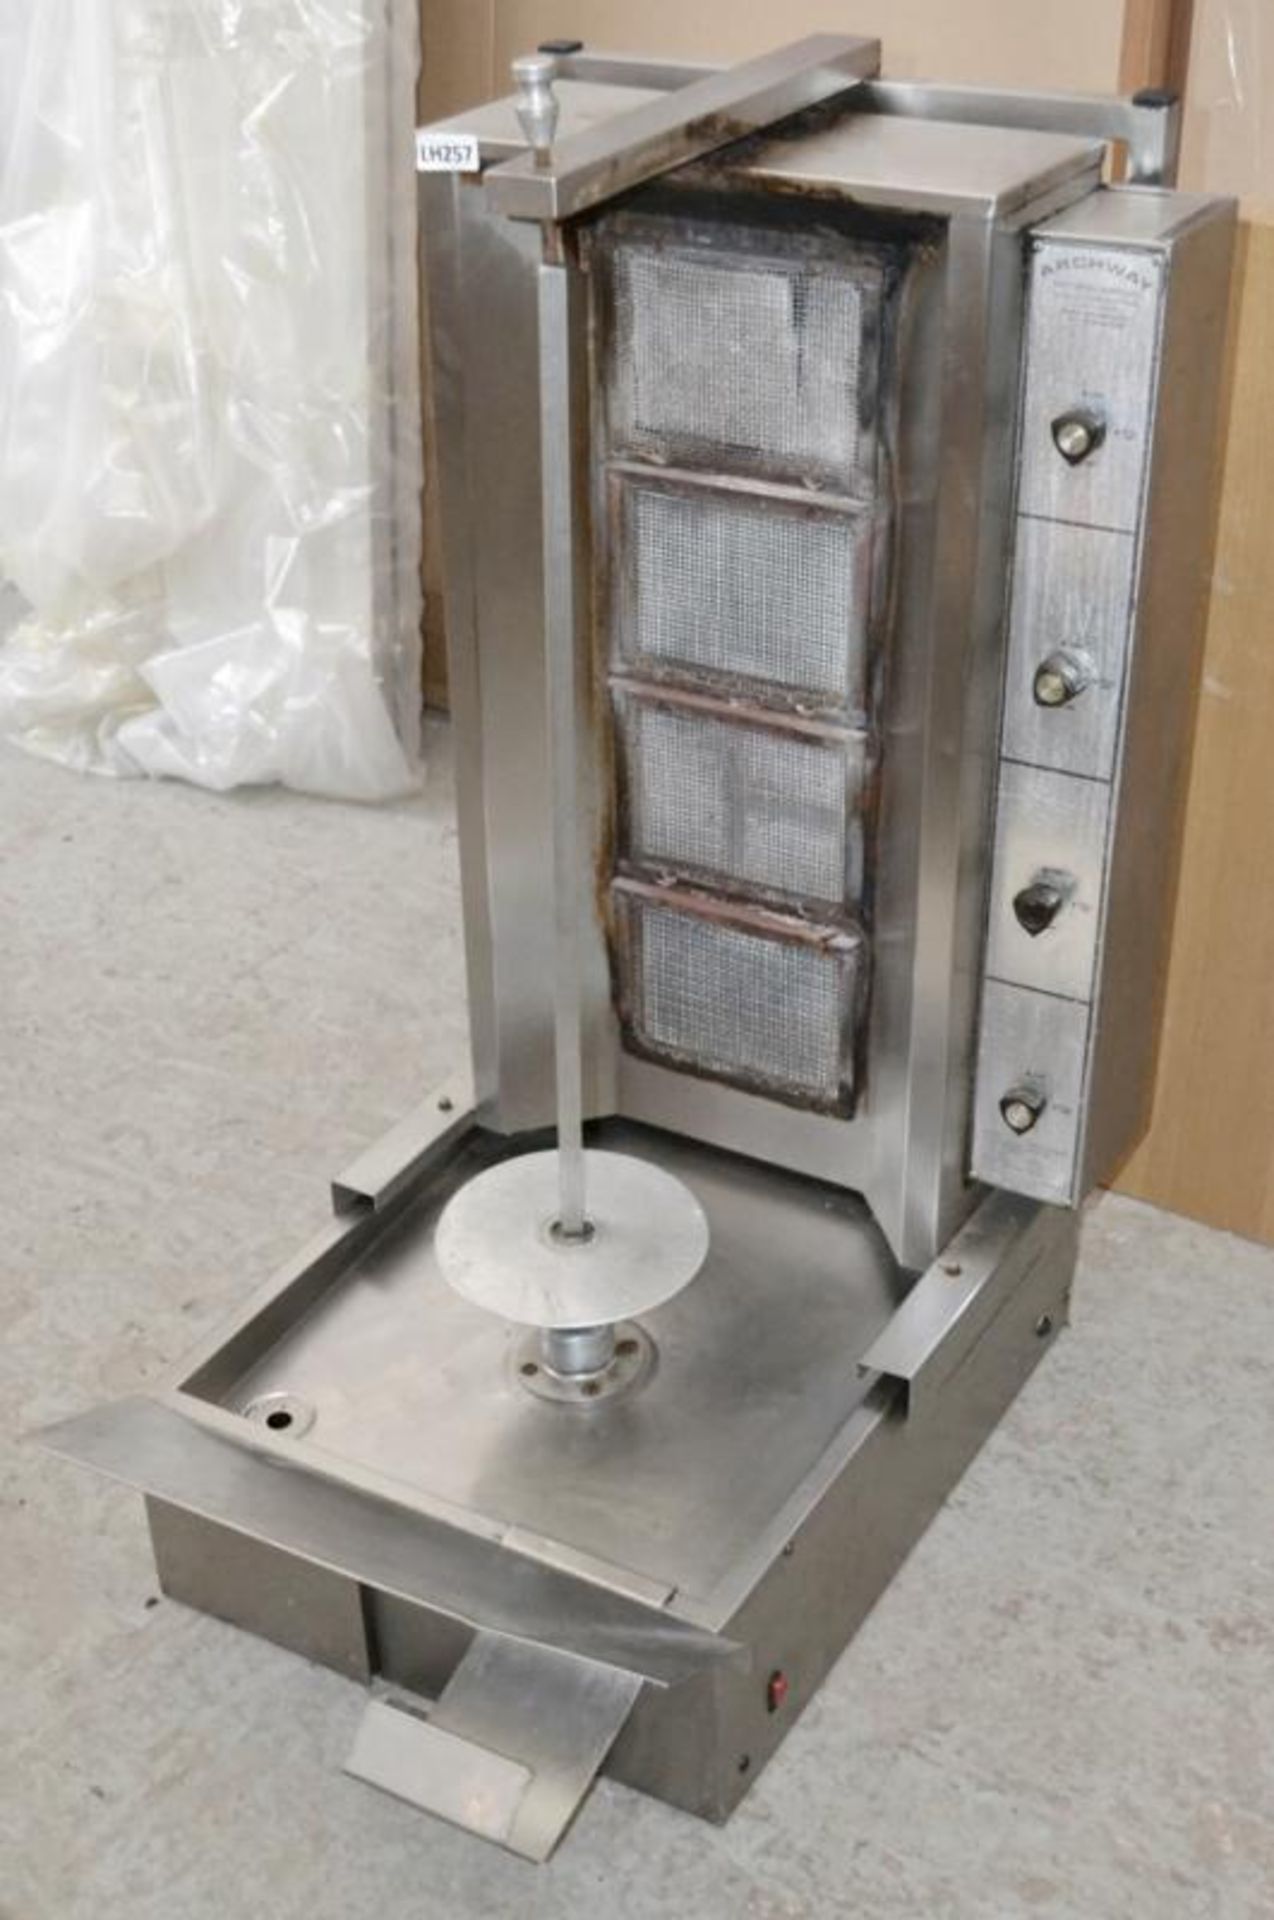 1 x ARCHWAY 4-Burner Natural Gas Doner Kebab Grill - Dimensions: W52 x H110 x D77cm - Ref: LH257 - - Image 7 of 7